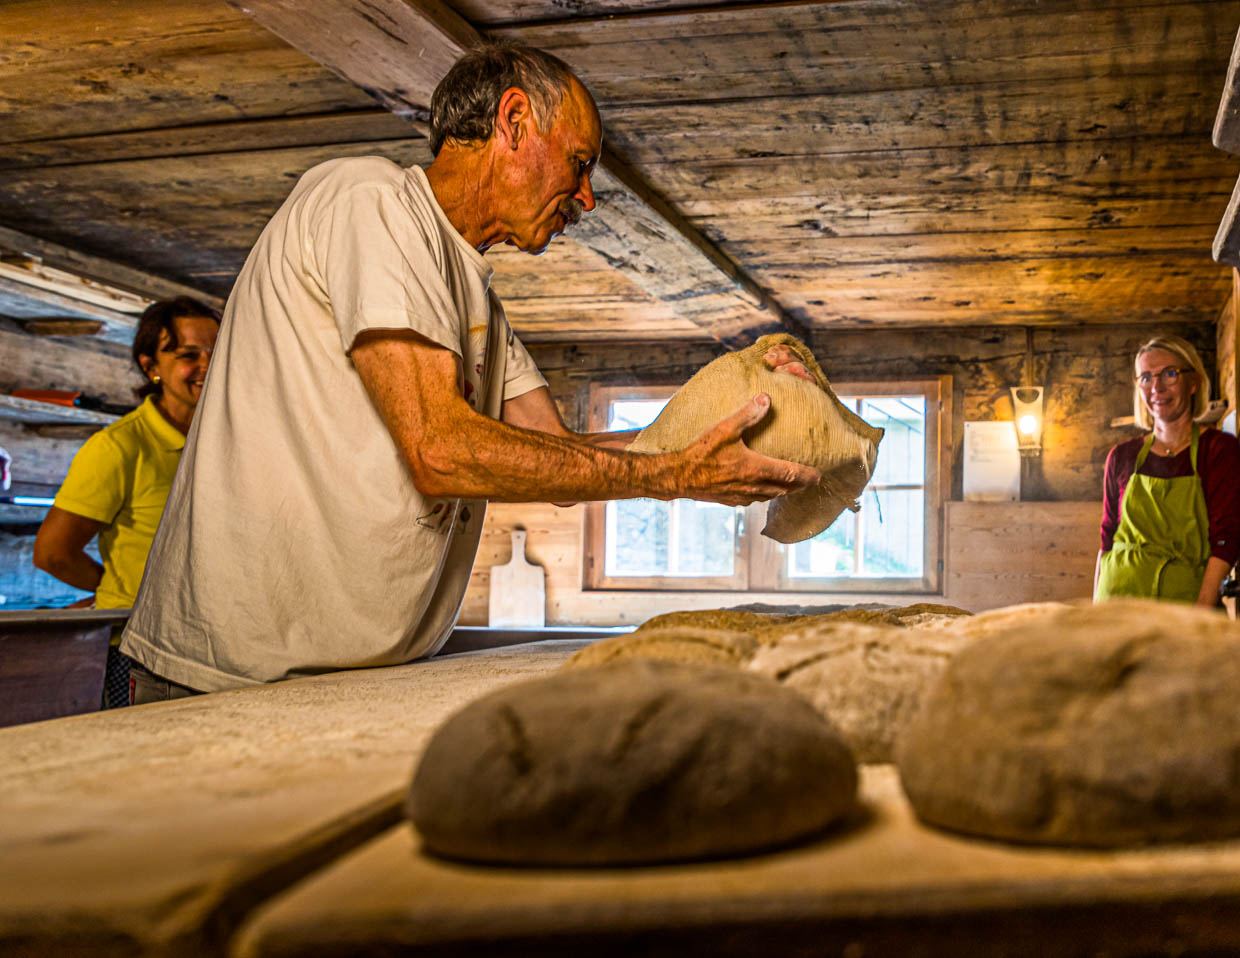 In Erschmatt, the rye breads typical of the Swiss canton of Valais are baked / © Photo: Georg Berg